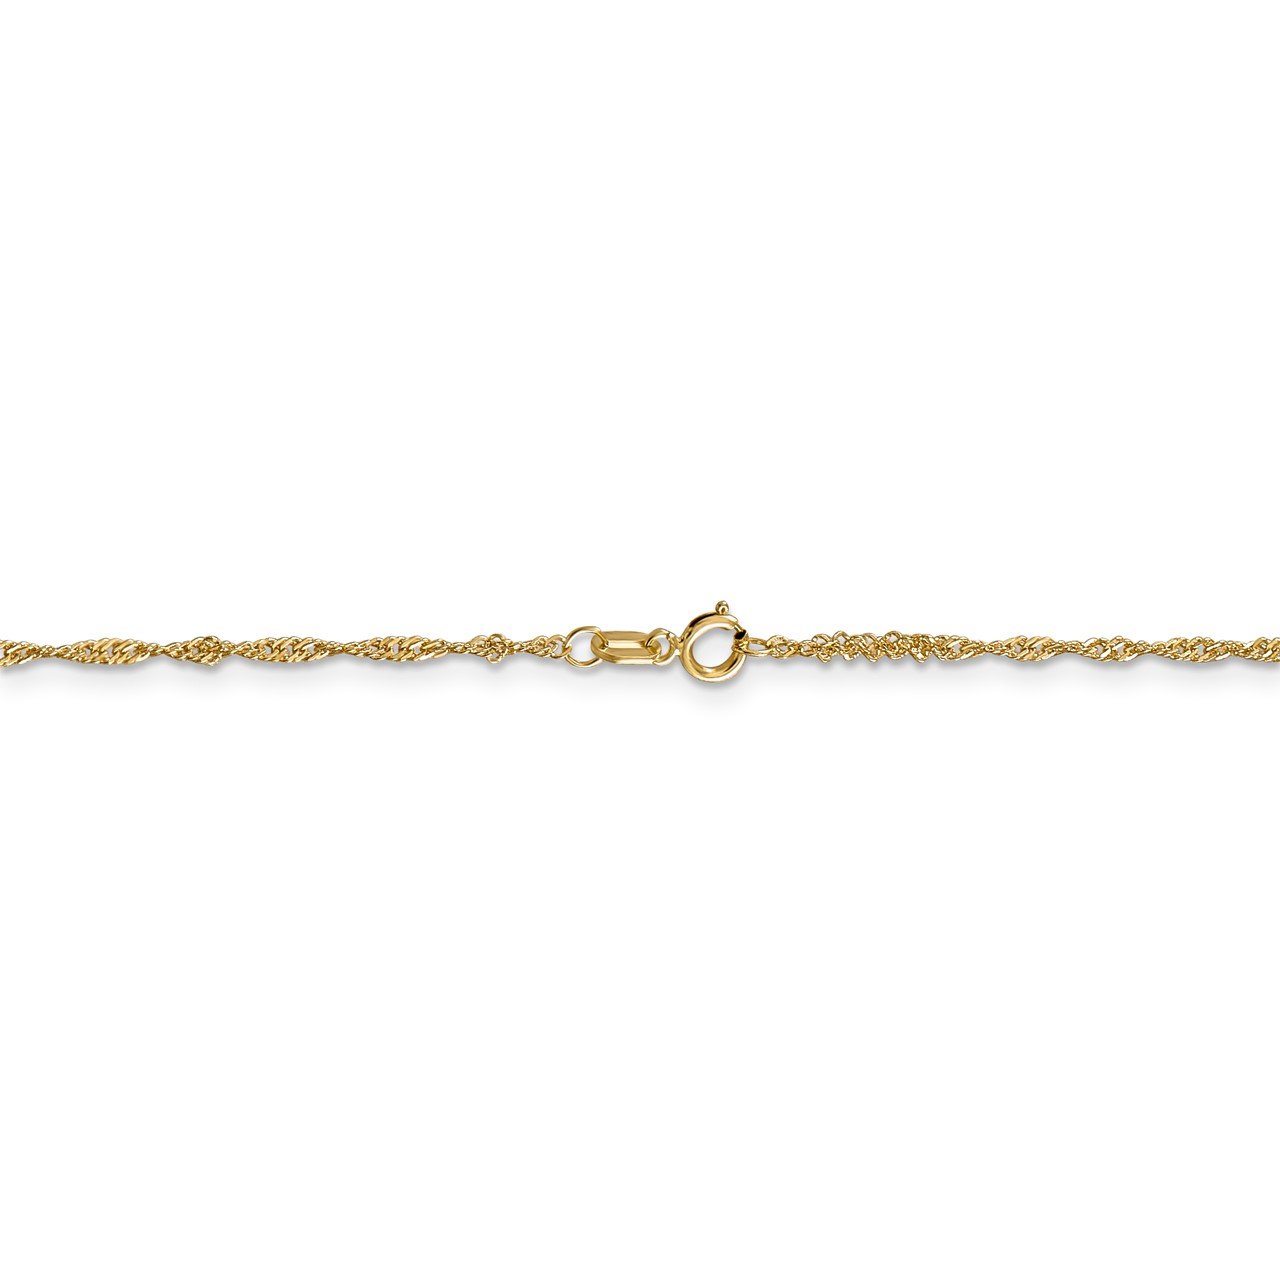 Leslie's 14K Singapore with Lock Chain-2